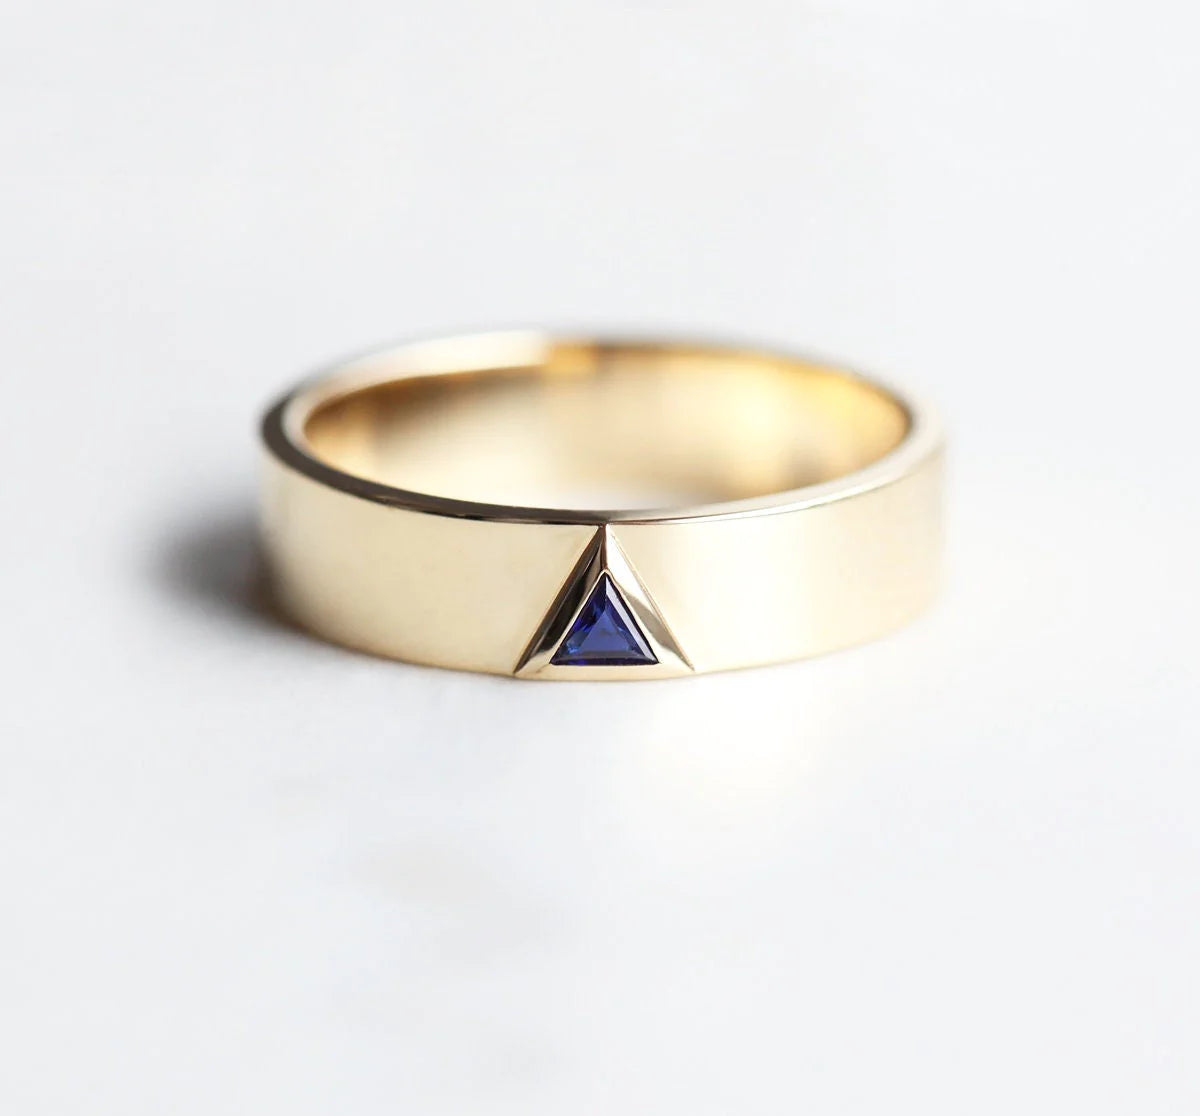 The Capucinne Triangle Sapphire Gold Ring makes a powerfully elegant, sleek, and simple holiday engagement ring.